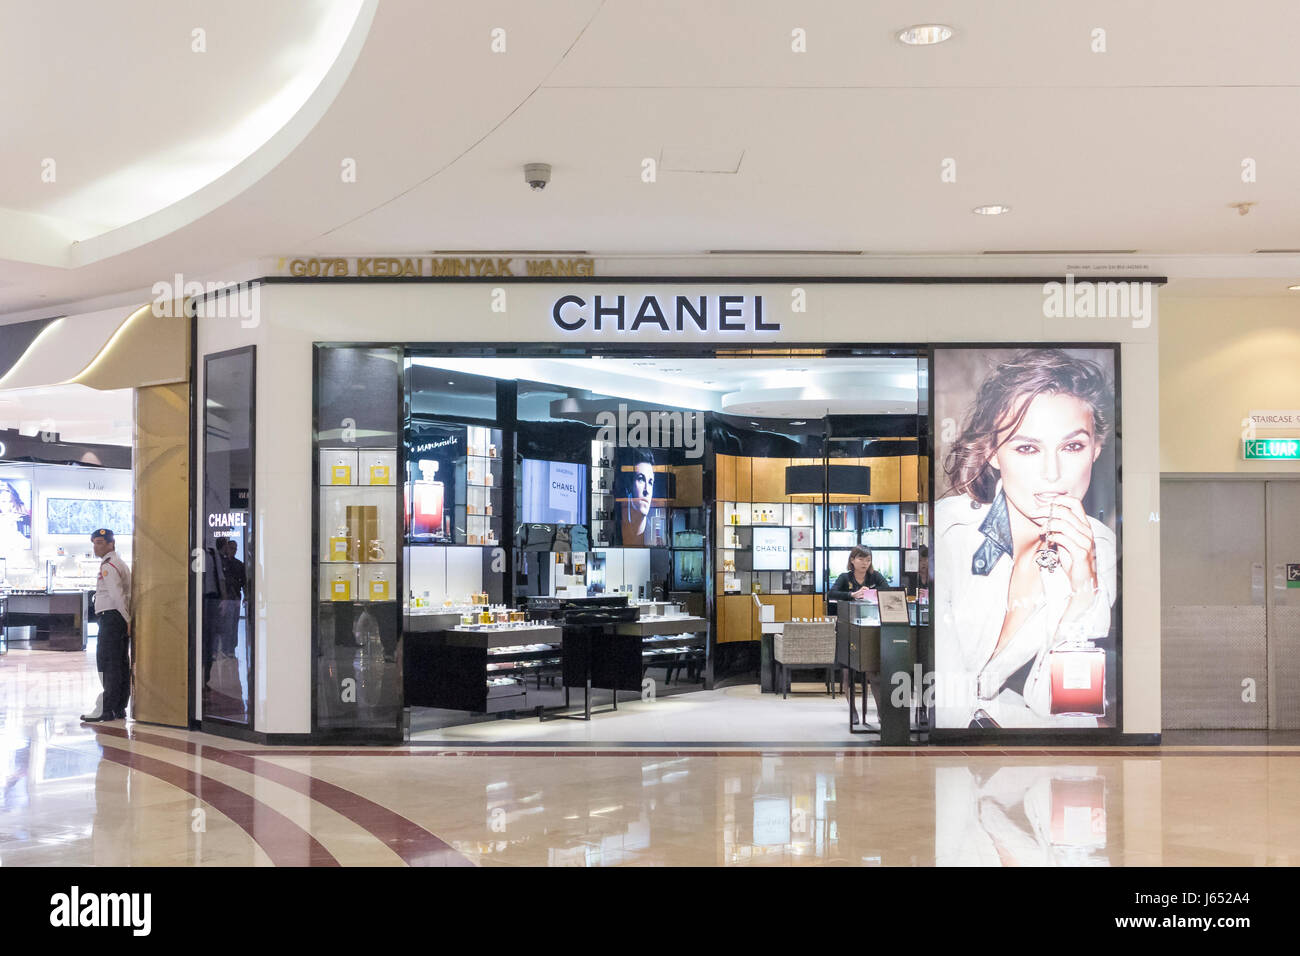 Chanel Store in Kuala Lumpur Editorial Stock Image - Image of boutique, klcc:  78003704